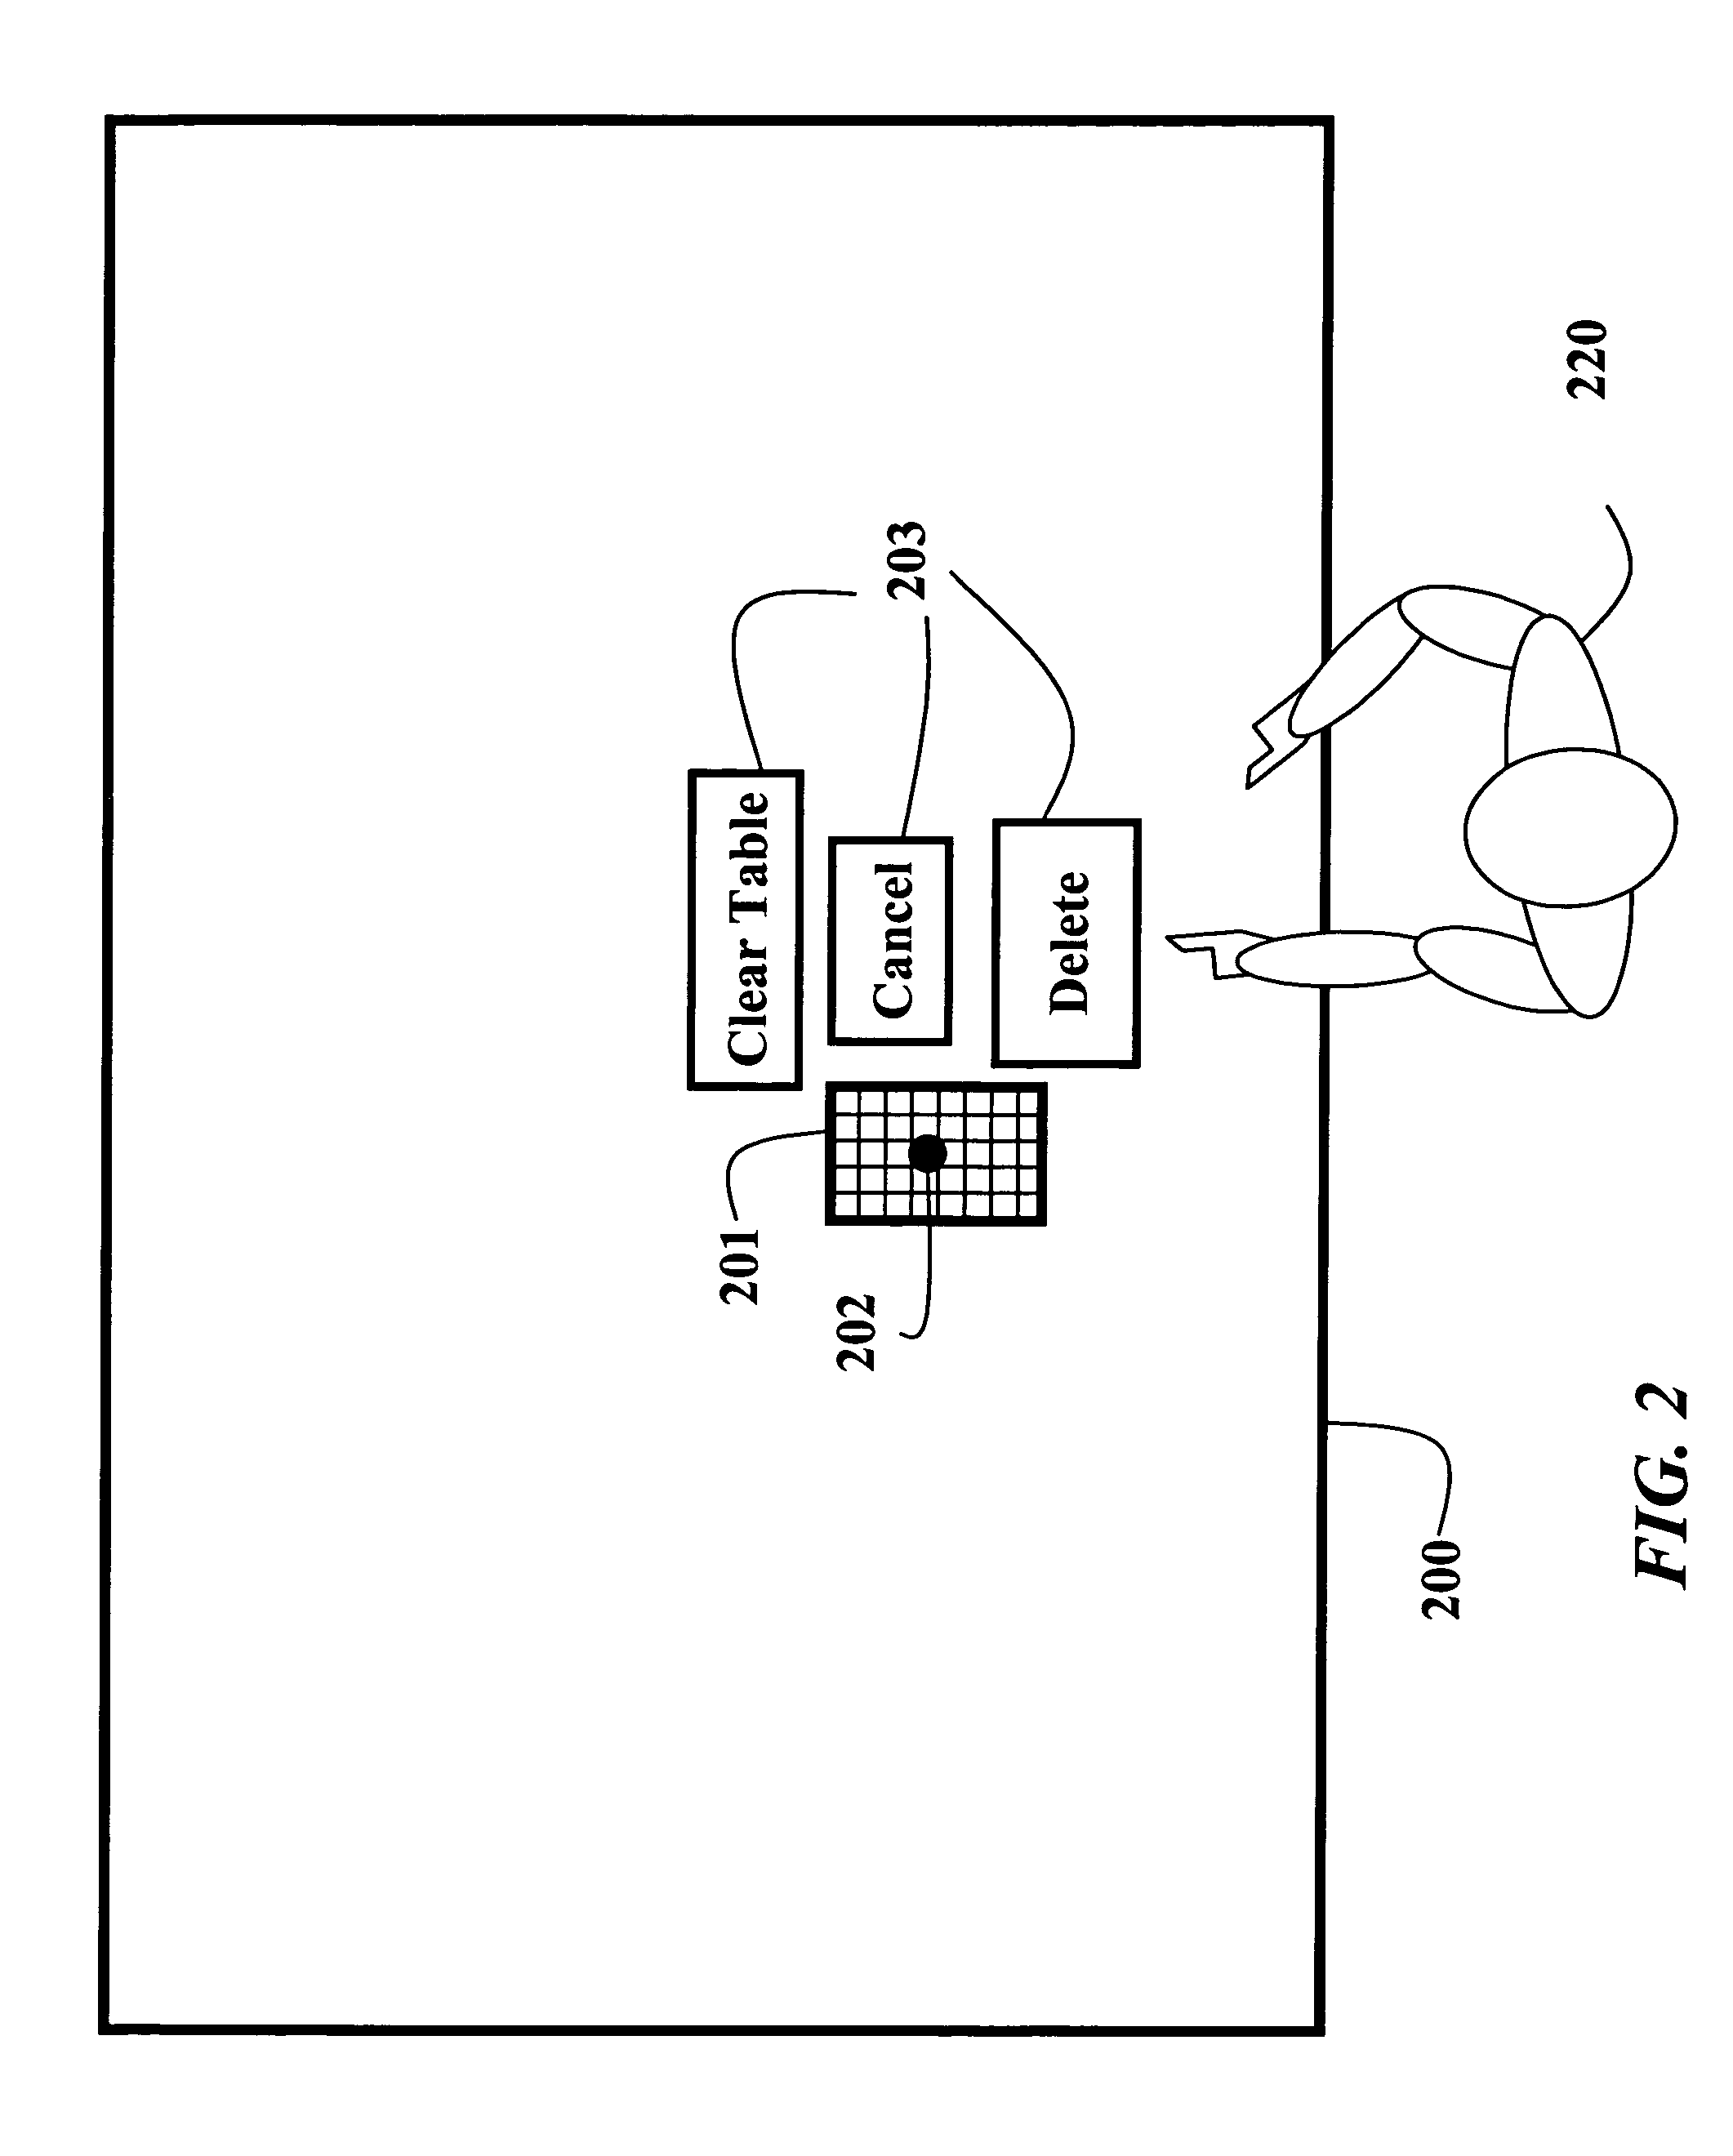 Method and system for manipulating graphical objects displayed on a touch-sensitive display surface using displaced pop-ups